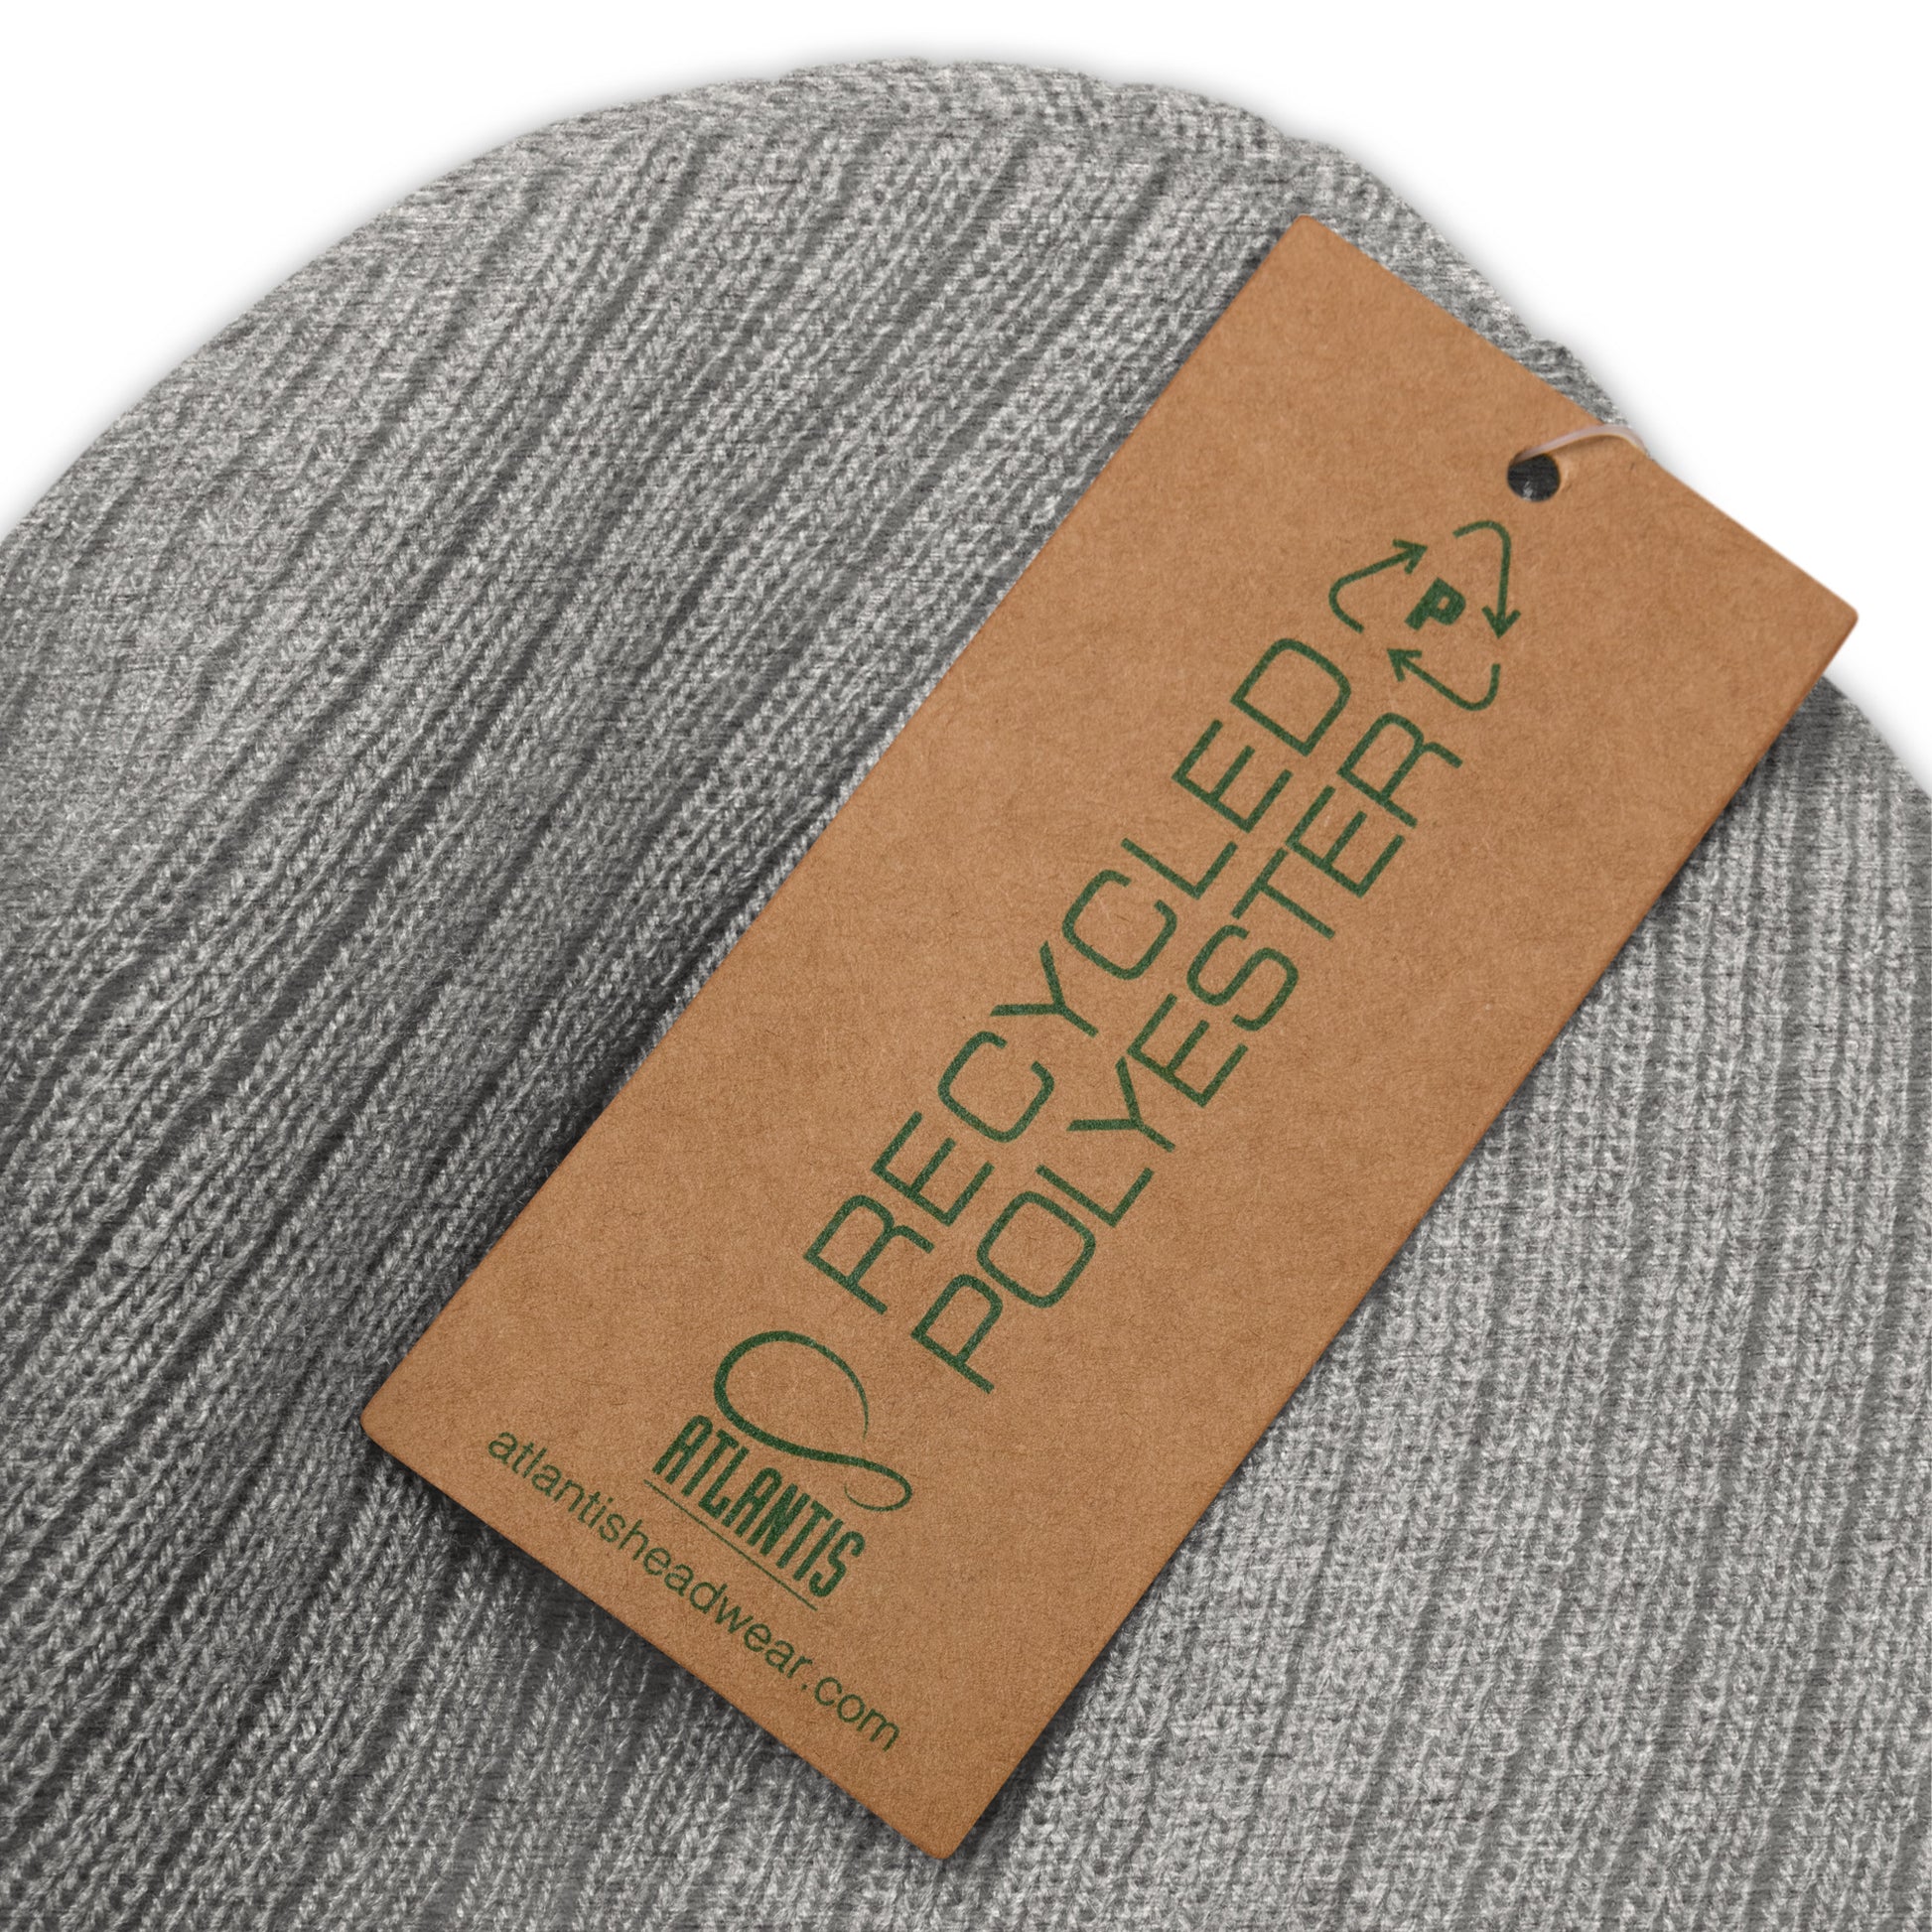 Snug and stylish 'Protect Your Peace Ribbed Knit Beanie' by Tribe of Weirdos, crafted for warmth and mindfulness.